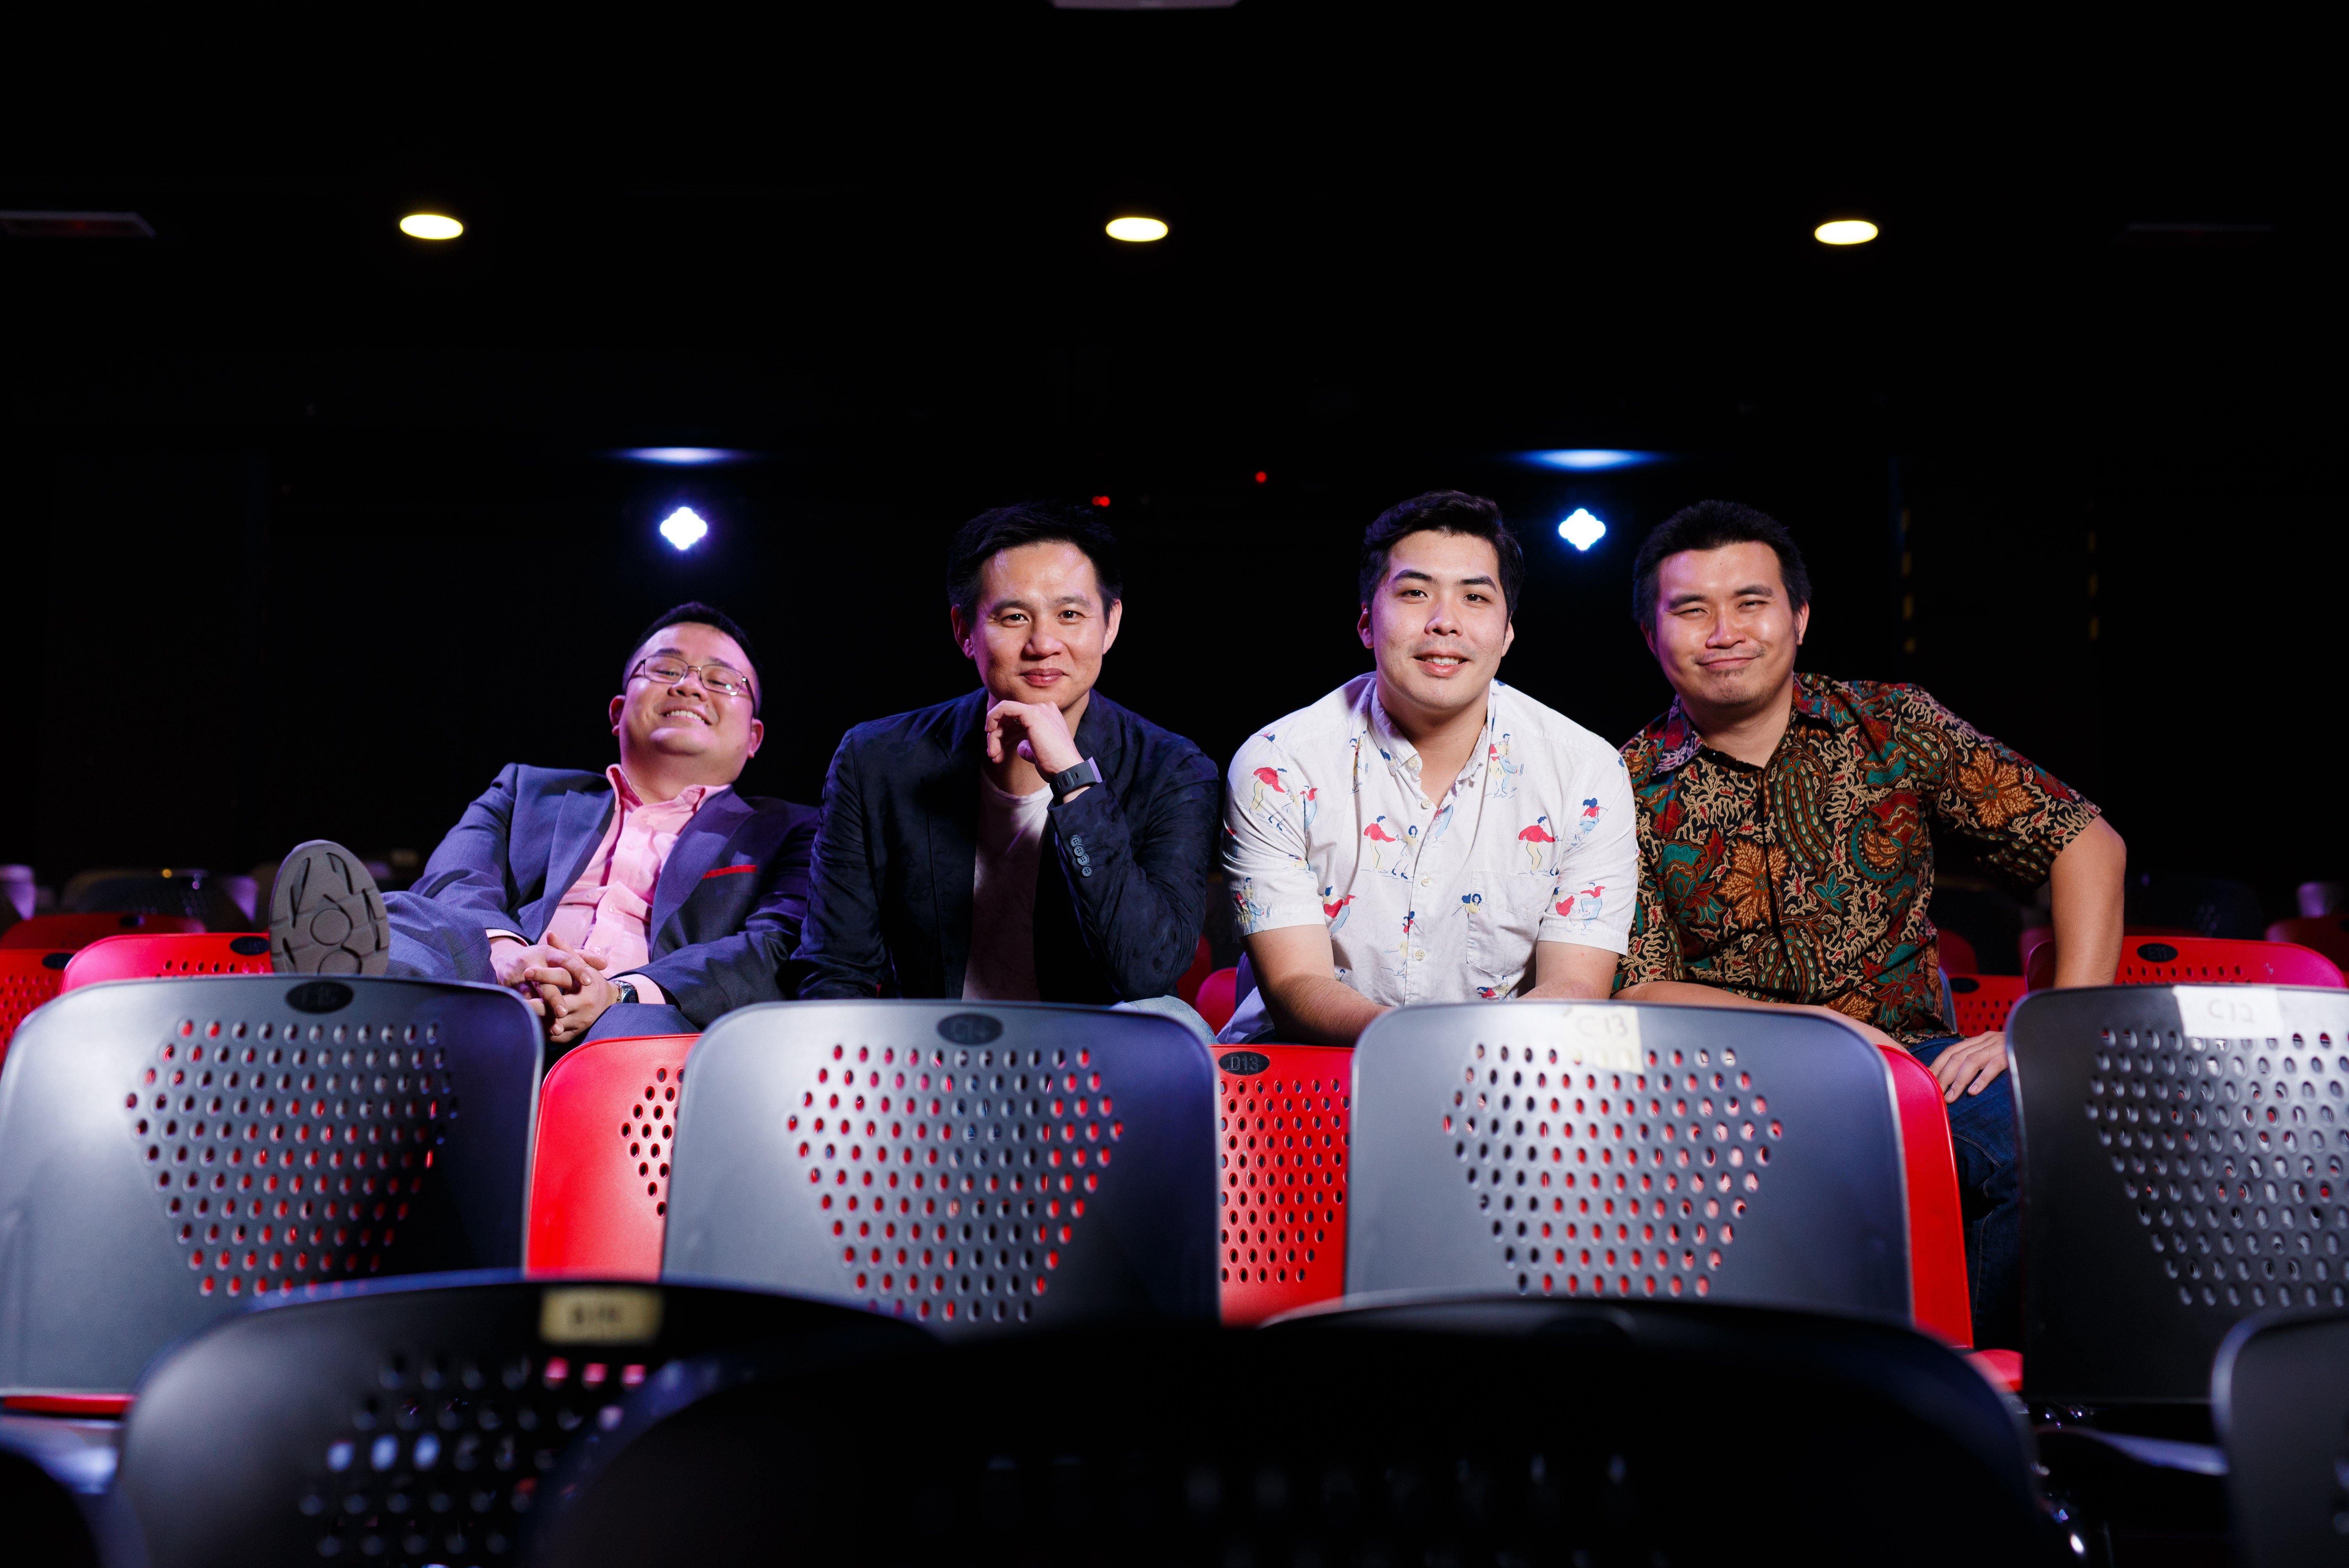 The Malaysian Association of Chinese Comedians (from left) Dr Jason Leong, Douglas Lim, Kuah Jenhan, and Phoon Chi Ho. The popular comedy troupe will be performing later this month at Sai Wan Ho Civic Centre, Hong Kong, on their farewell tour.